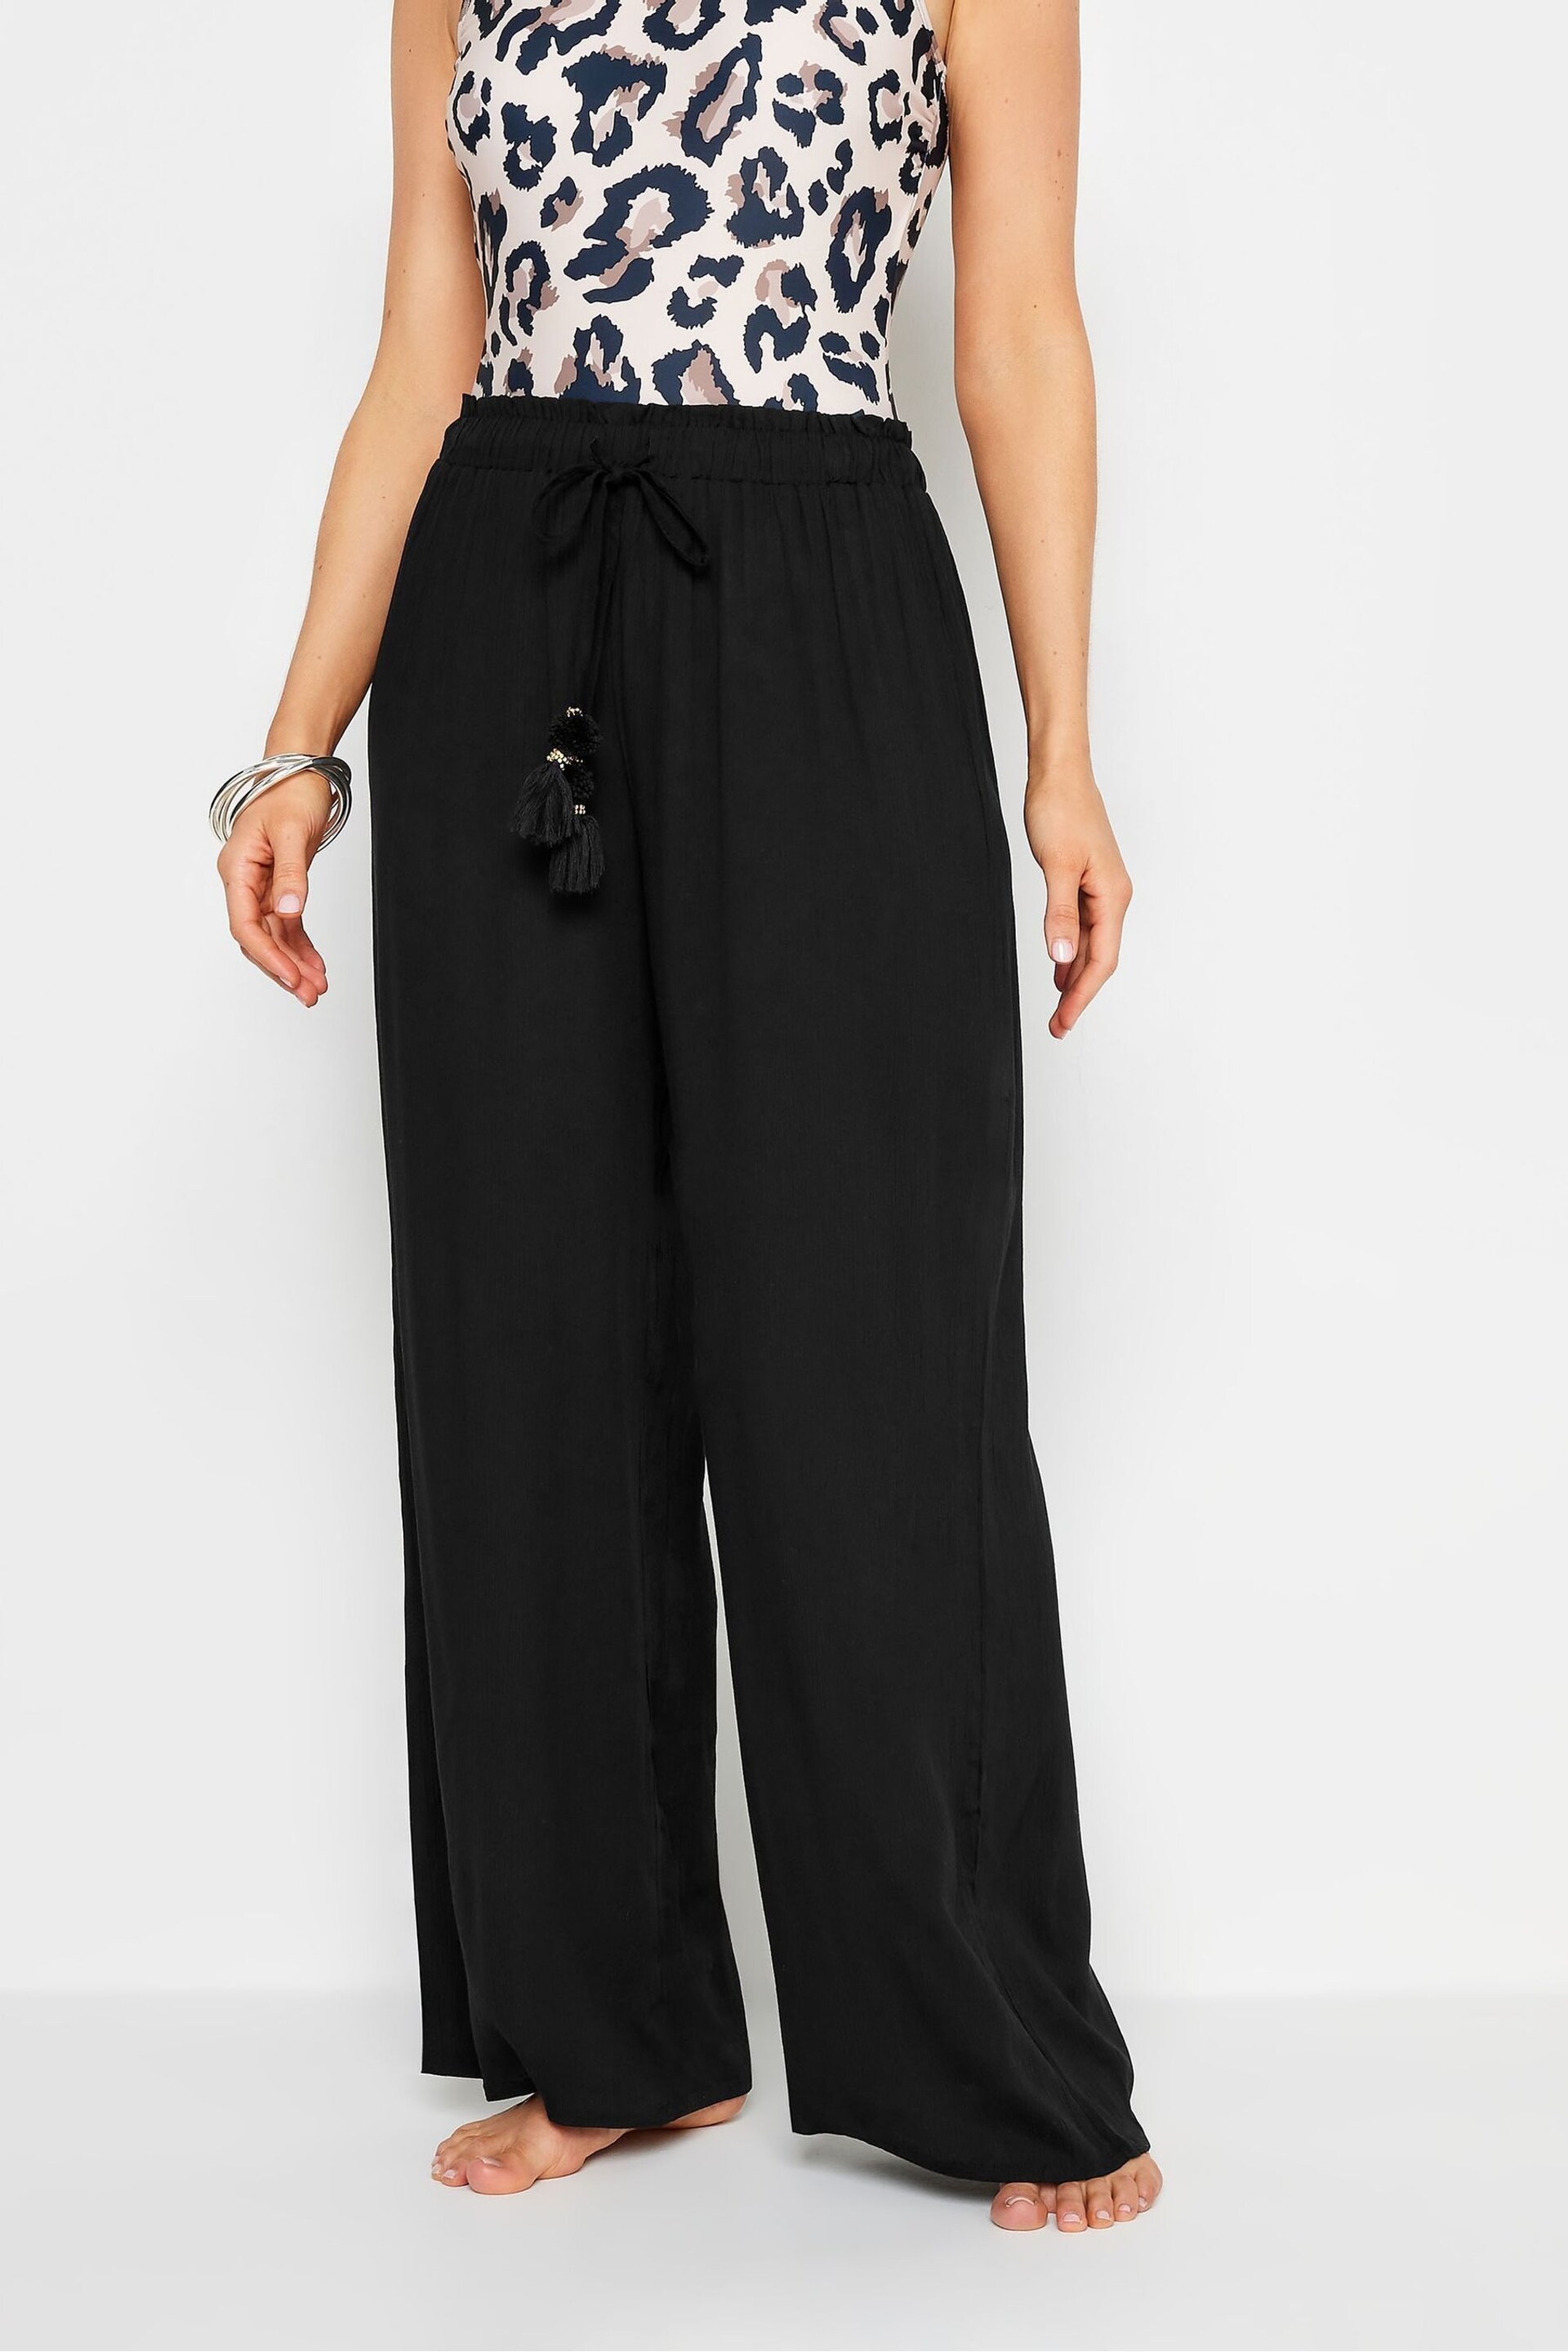 Long Tall Sally Black Crinkle Trousers - Image 2 of 6